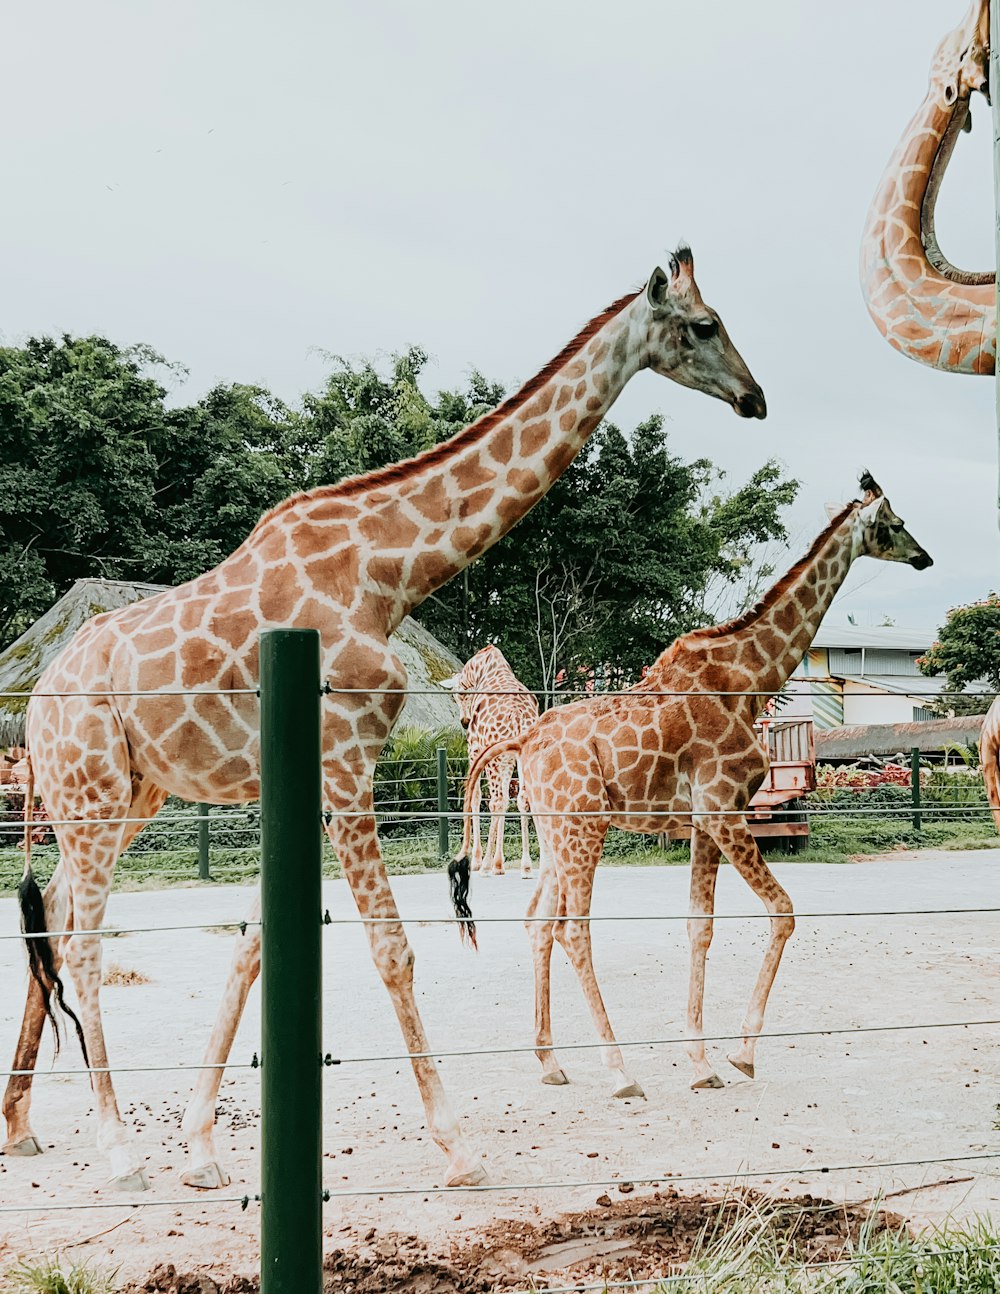 a group of giraffes walking around in an enclosure